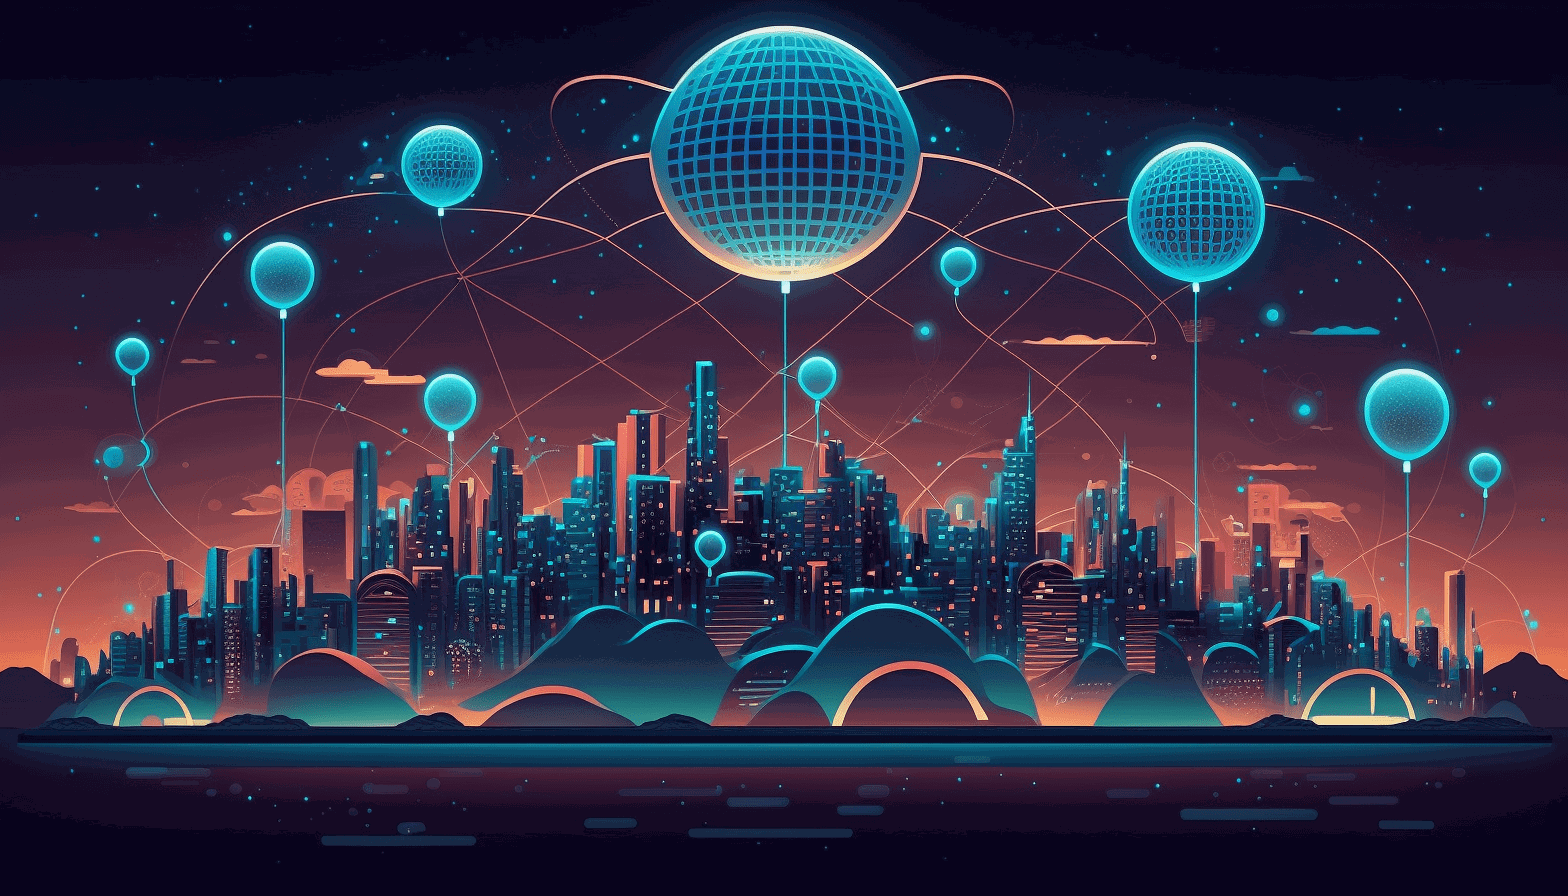 A stylized illustration of a cityscape with various IoT devices connected to a network represented as a web of light, with the Helium logo prominently displayed.